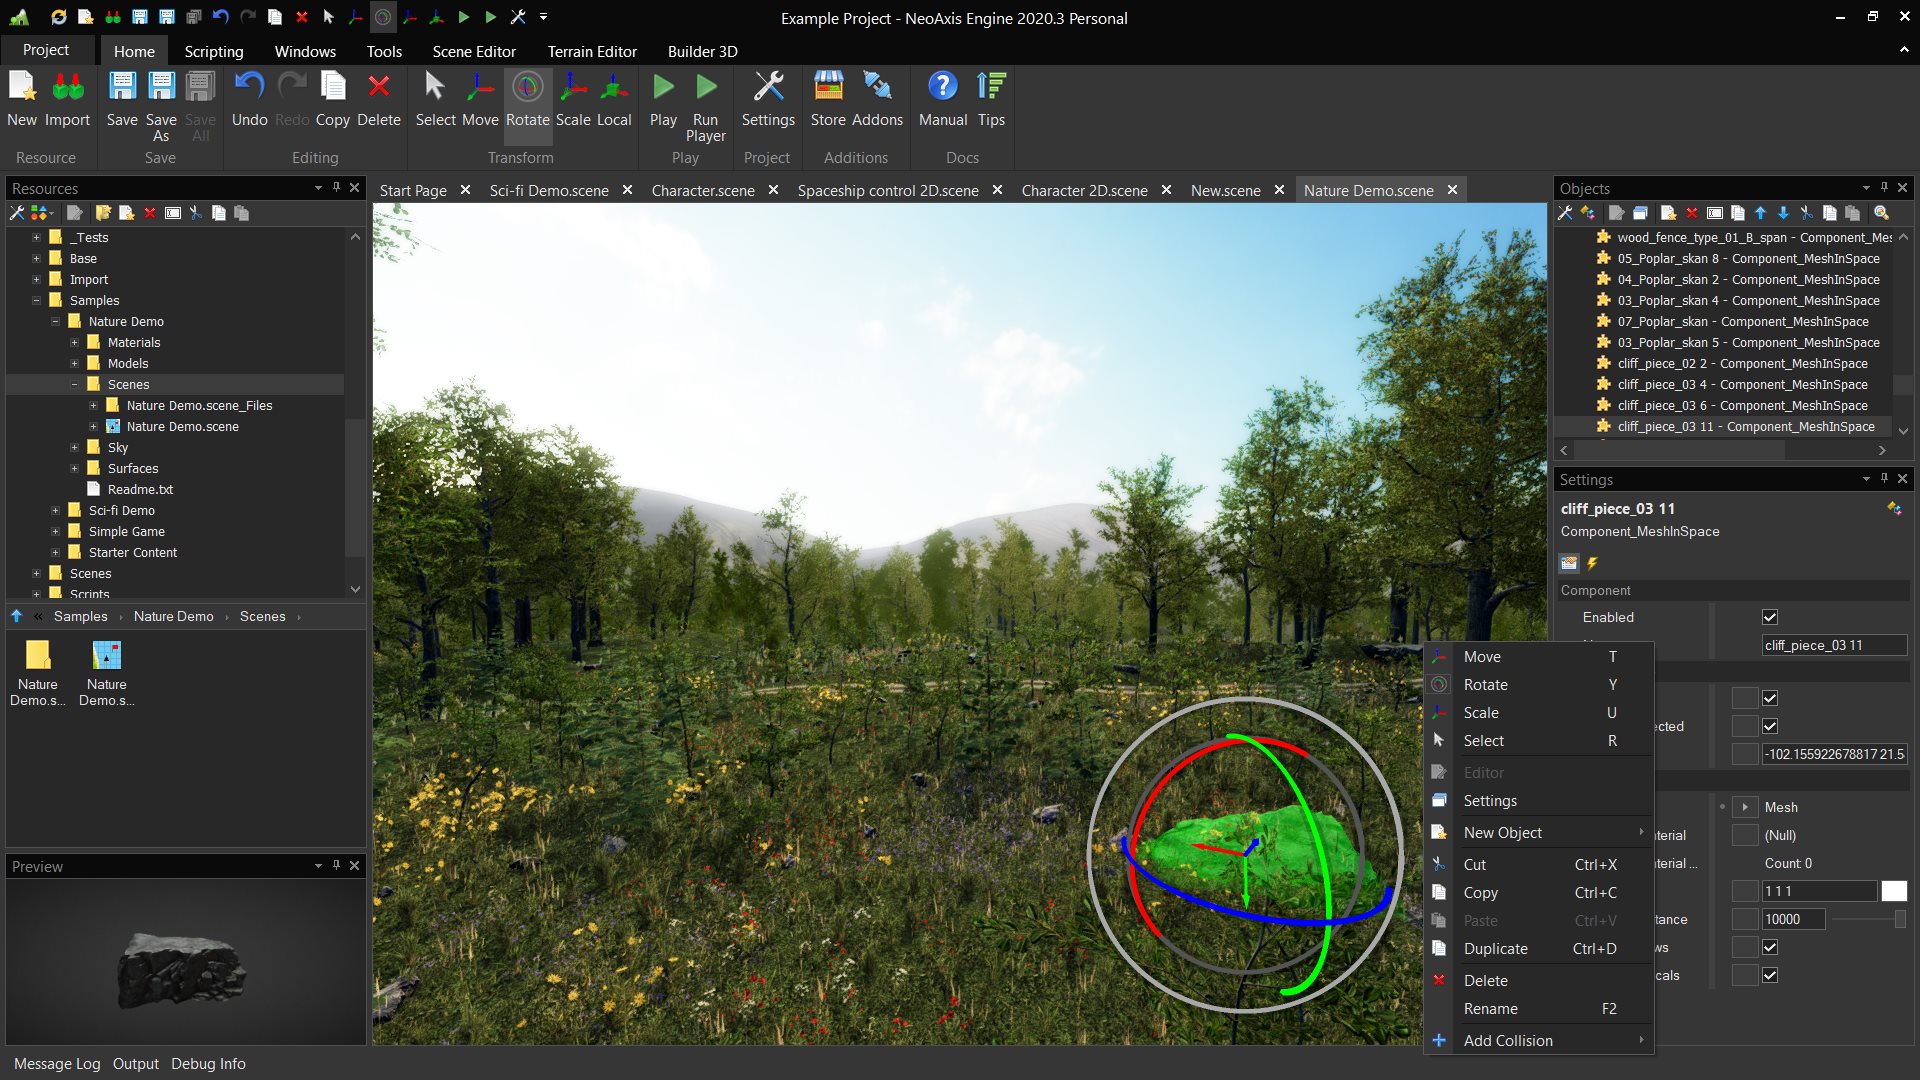 NeoAxis Engine, 3D and 2D game engine, switched to a new royalty-free, open source license